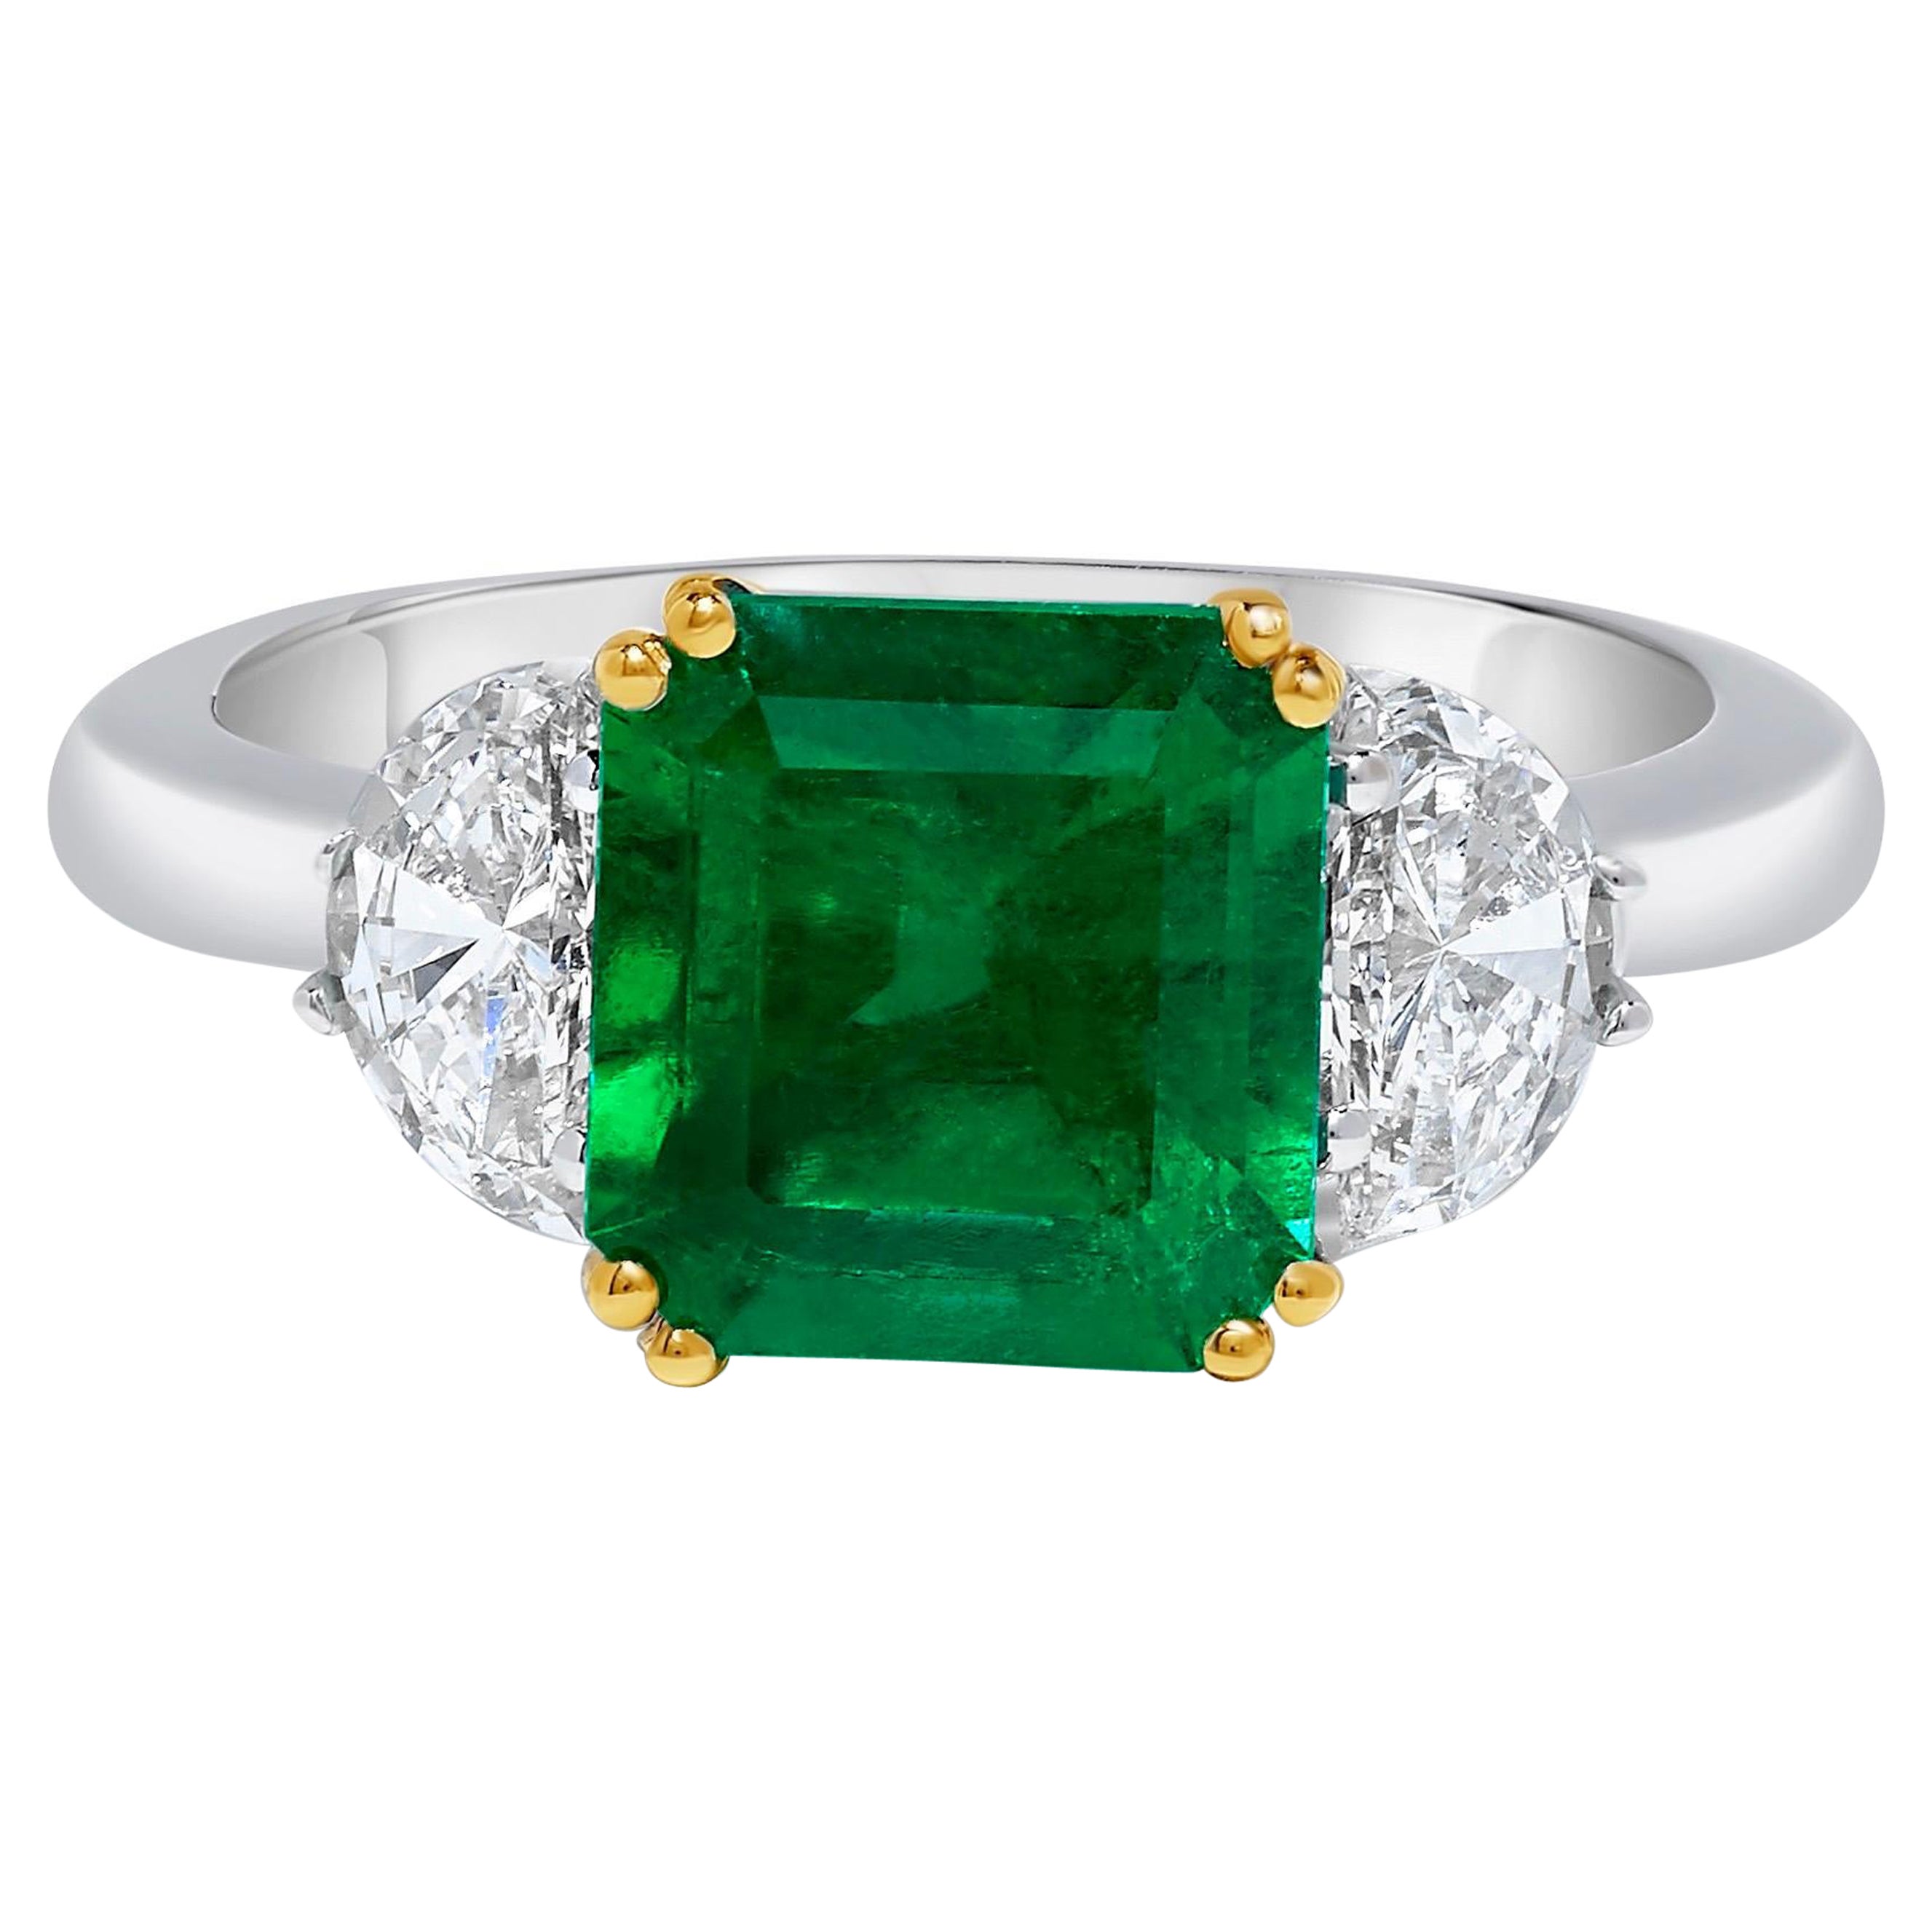 Emilio Jewelry Certified 3.69 Carat Colombian Emerald Ring For Sale